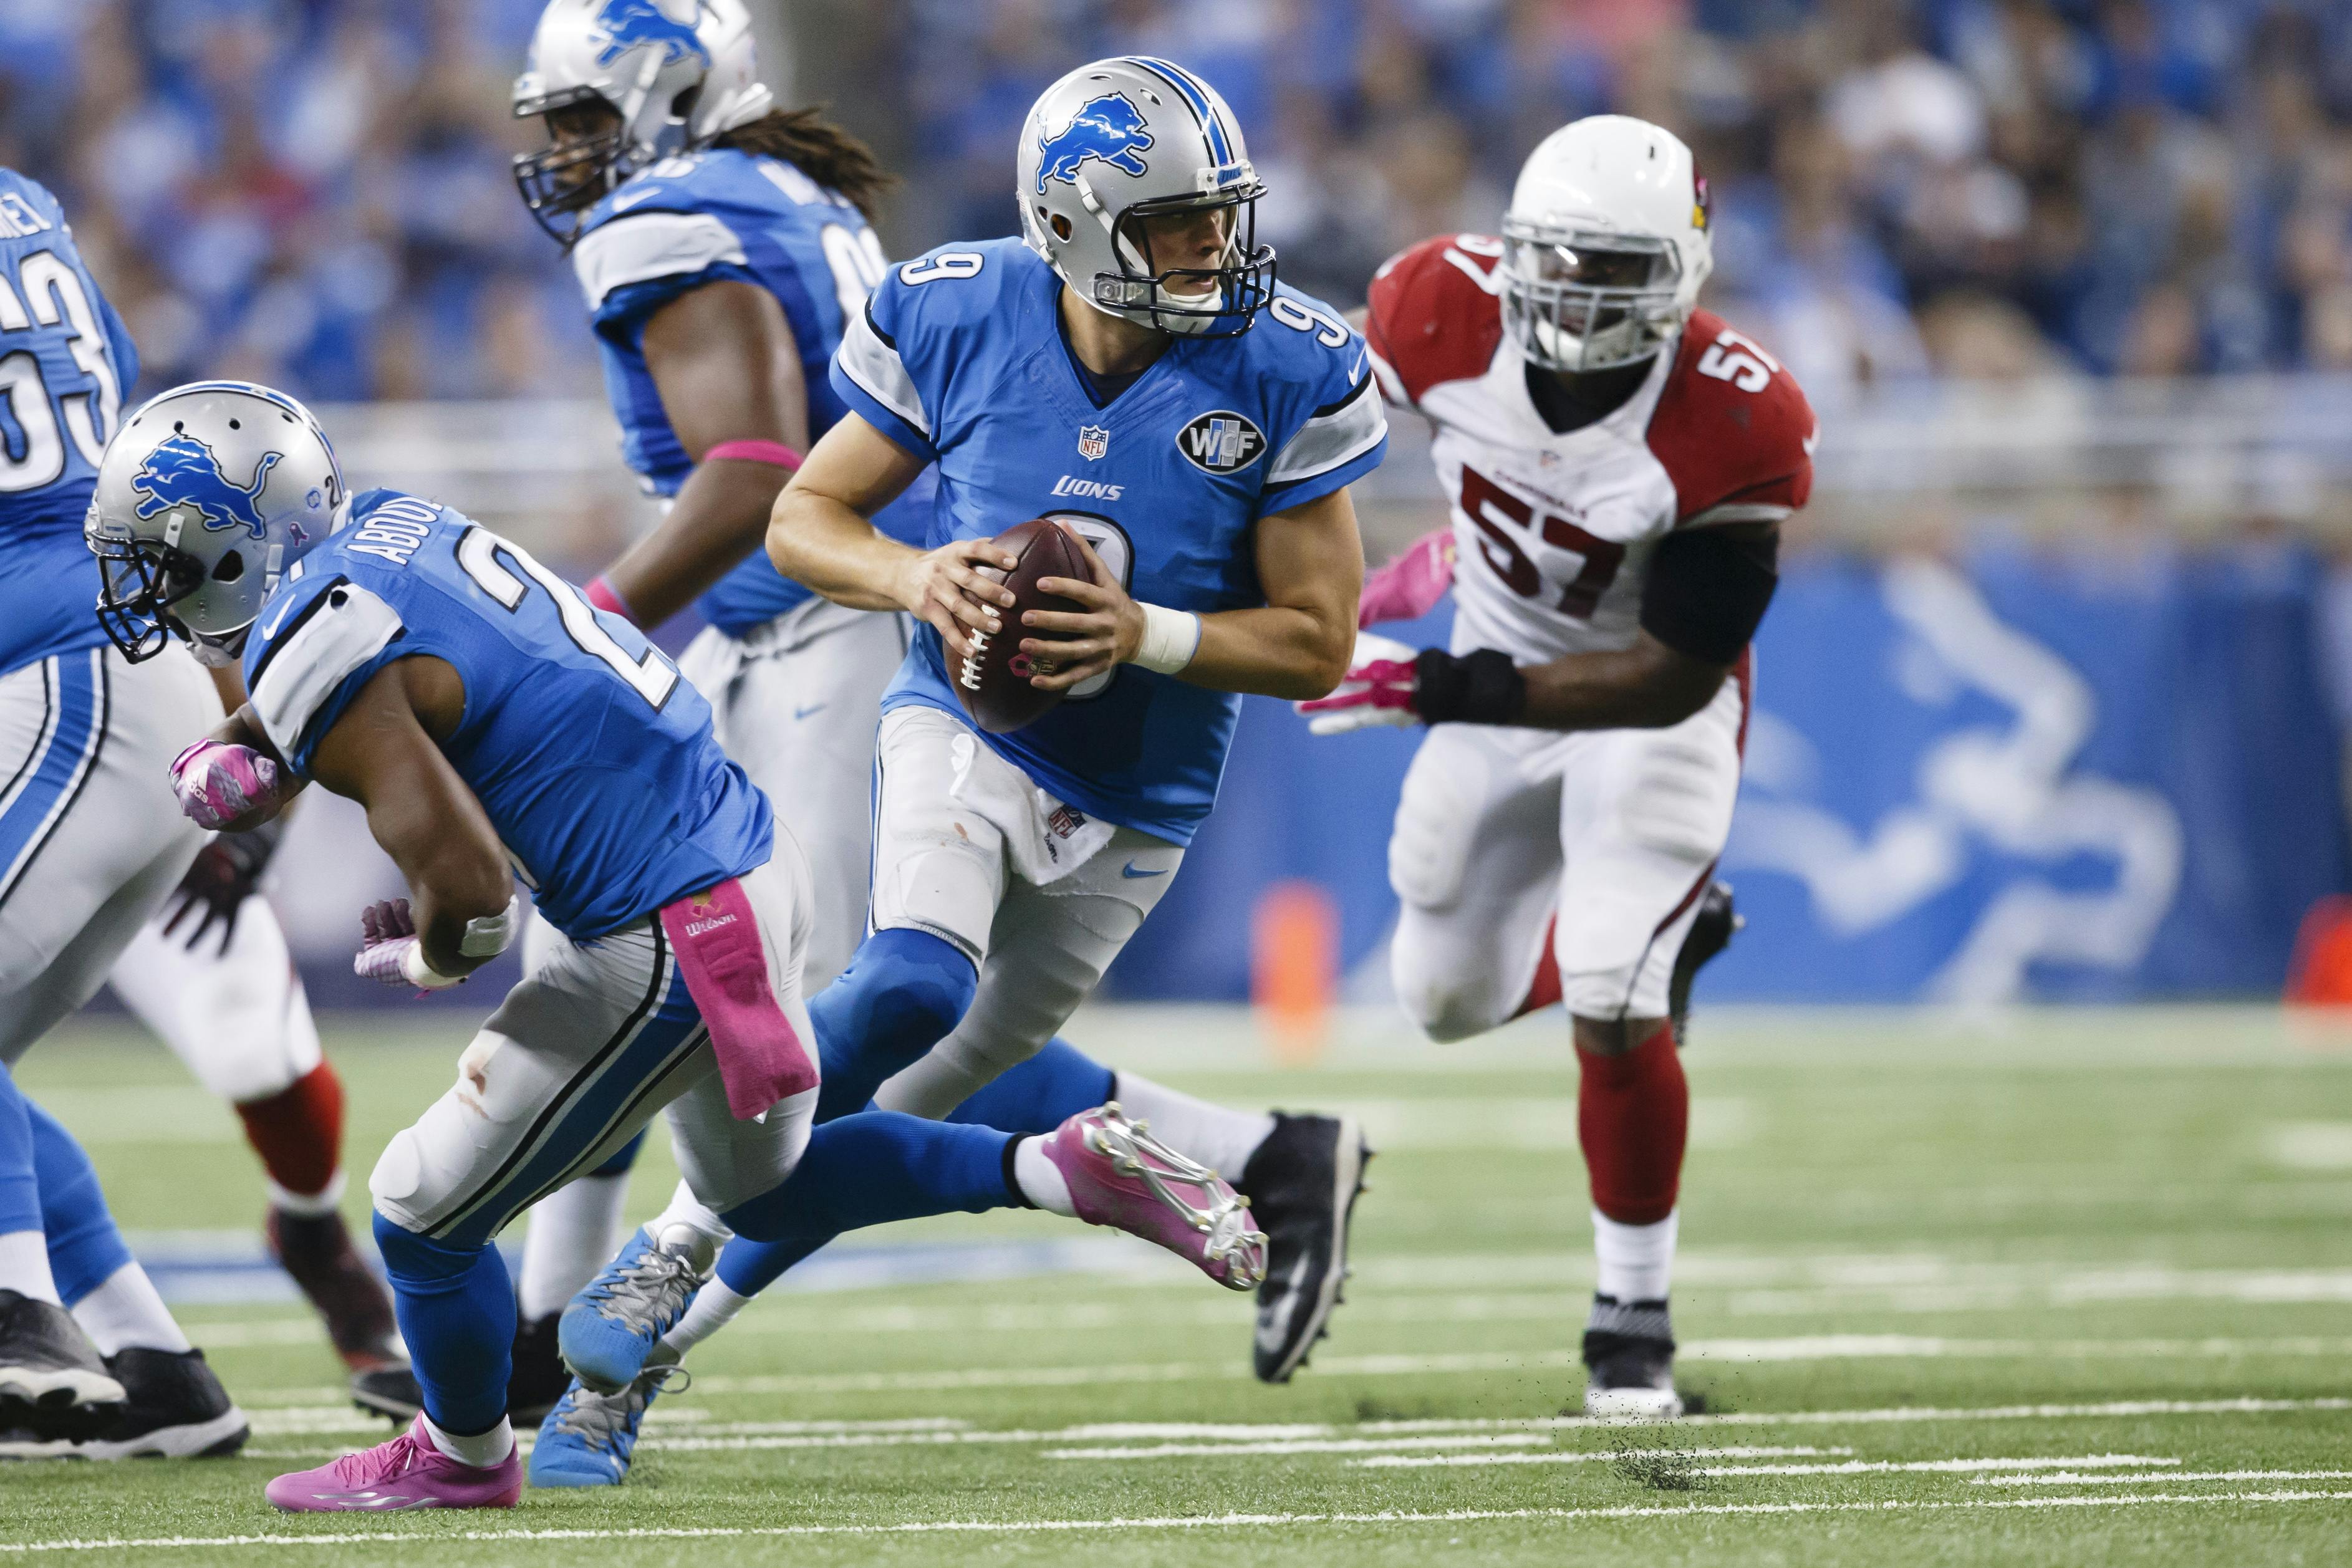 Detroit Lions quarterback Matthew Stafford (9) rolls out to pass against the Arizona Cardinals during an NFL football game at Ford Field in Detroit, Sunday, Oct. 11, 2015. (AP Photo/Rick Osentoski)